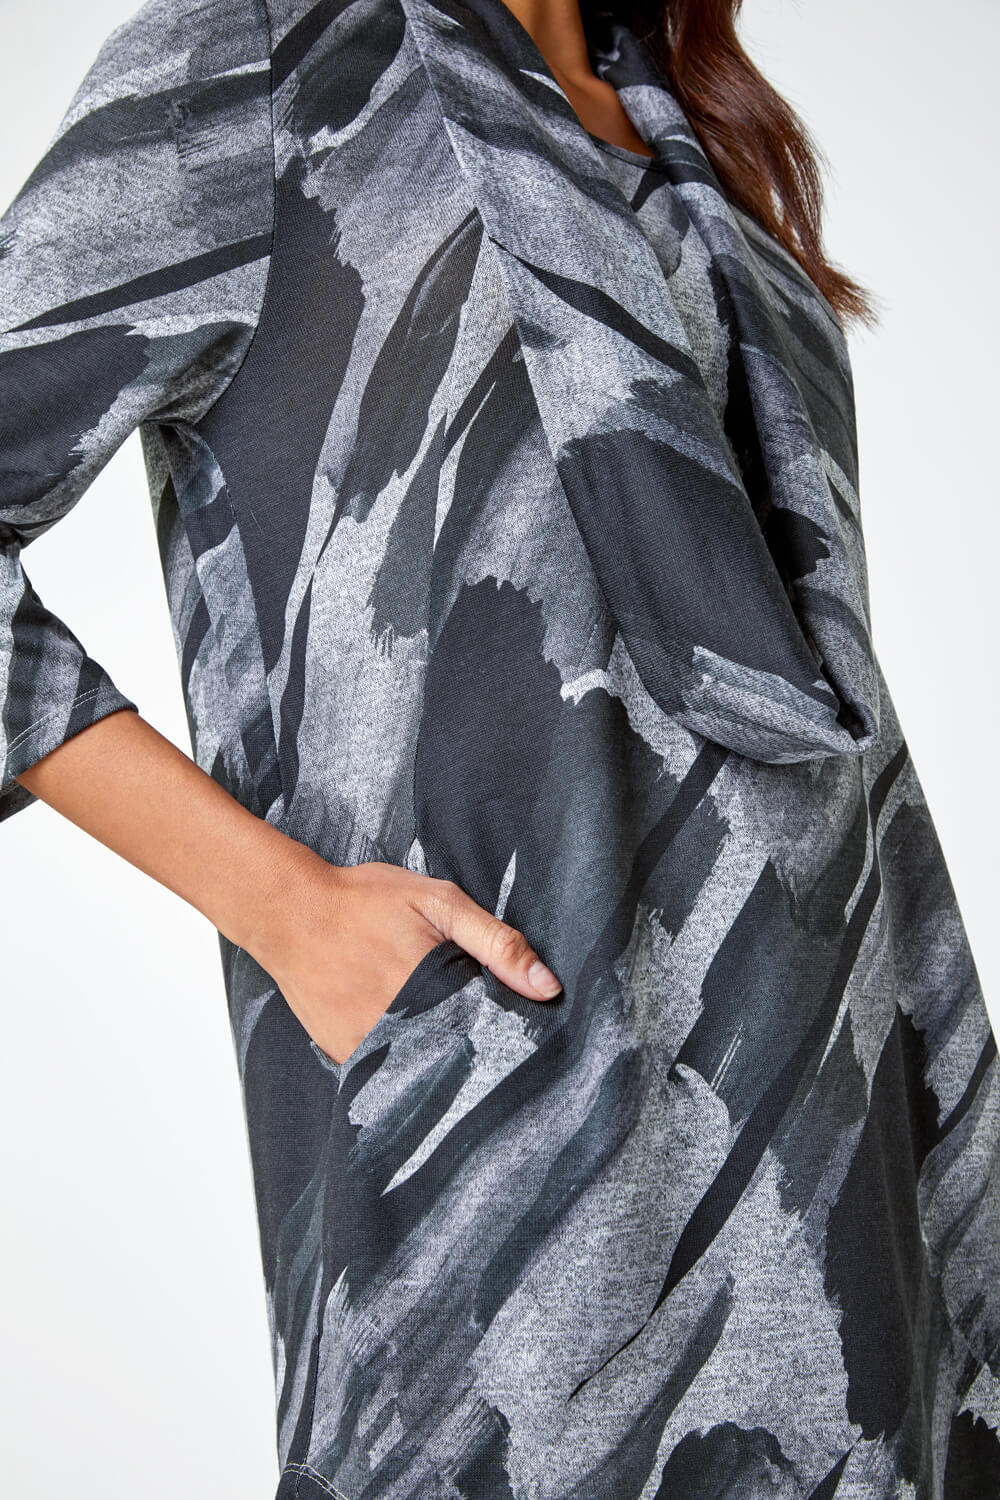 Charcoal Abstract Print Pocket Top with Snood, Image 5 of 5